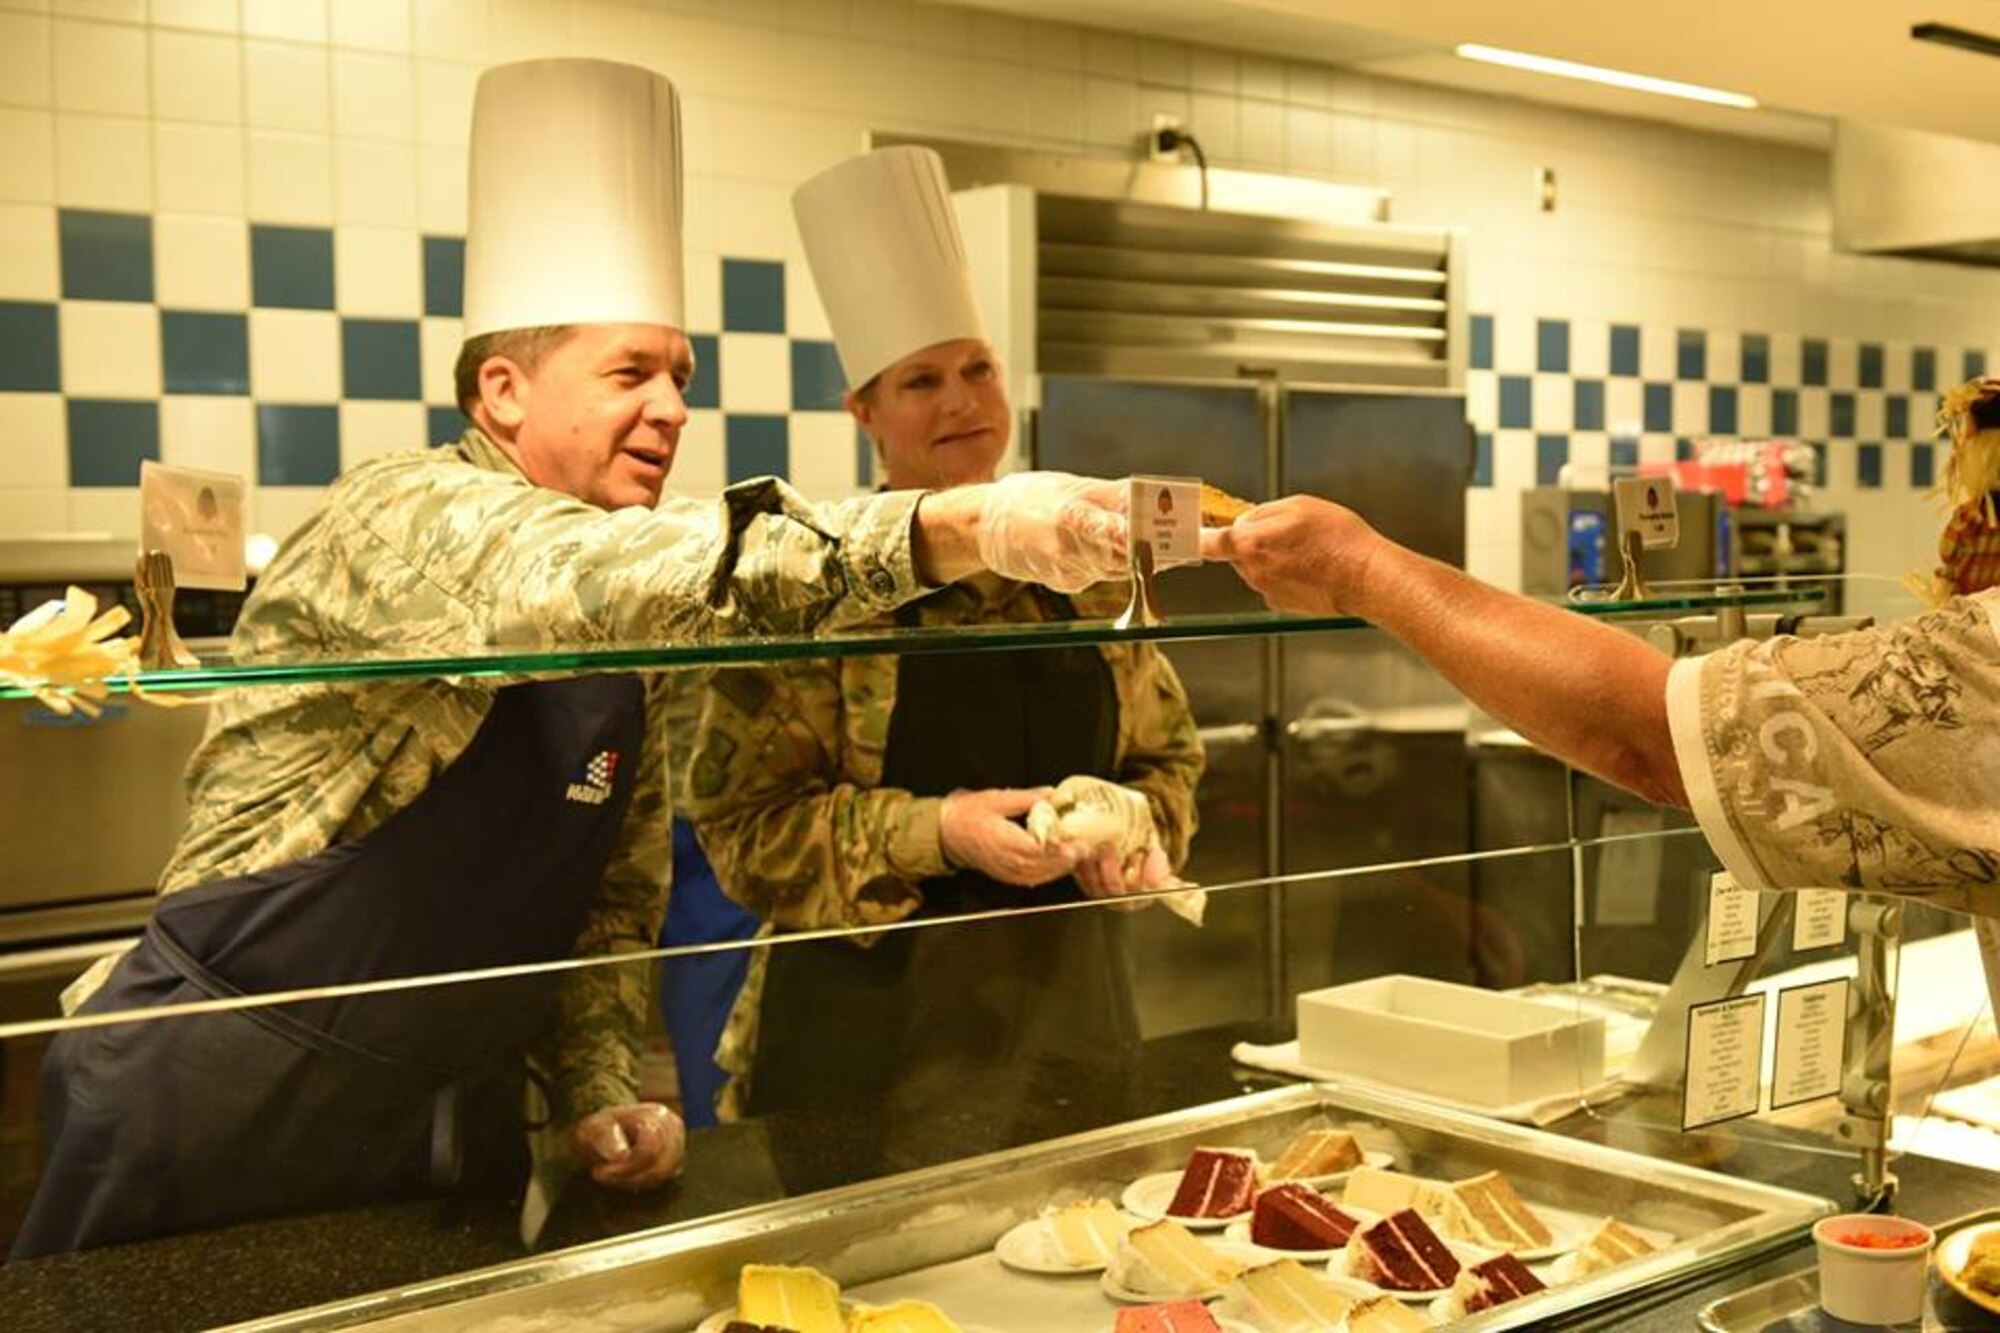 Col. Donald Shannon, 45th Weather Squadron commander, and Maj. Dawn Baker, 45th Launch Readiness Squadron commander, serve a Thanksgiving meal at Patrick Air Force Base Riverside Dining Facility on Nov. 22, 2018. Airmen live by their core values, and the 45th SW leadership demonstrated Air Force core values by serving our community meals during the Thanksgiving holiday.